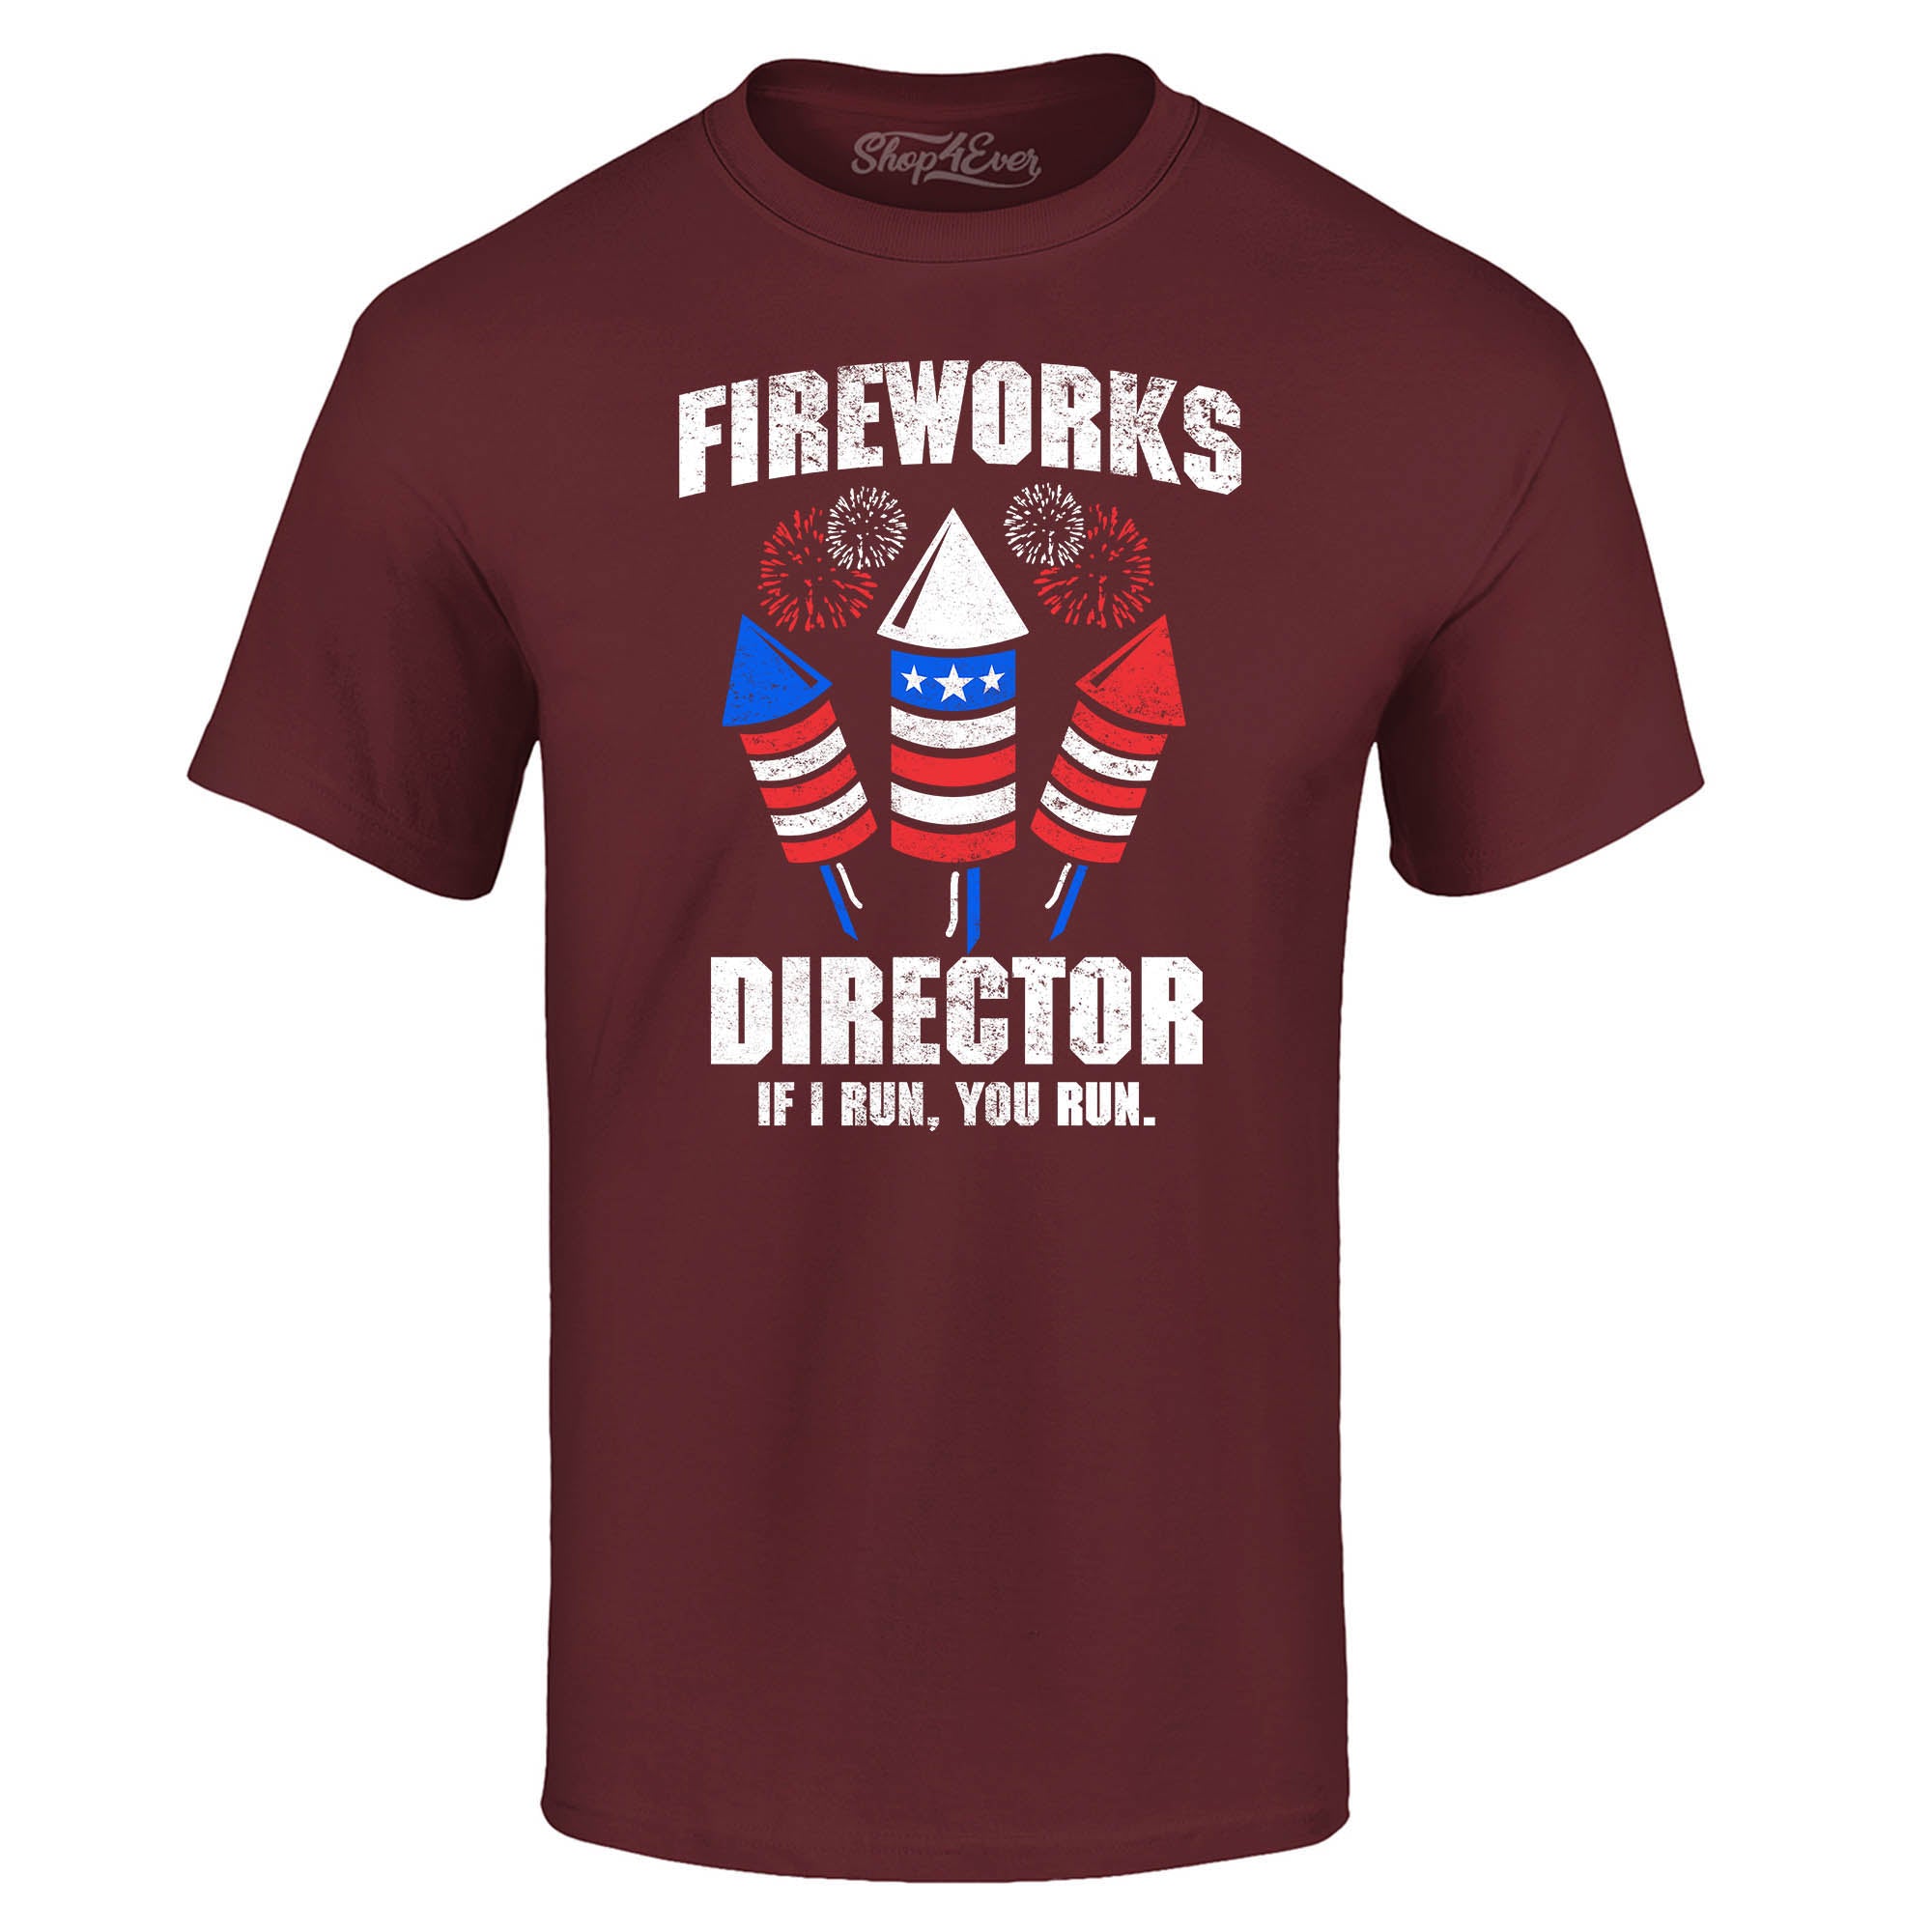 Fireworks Director 4th of July T-Shirt